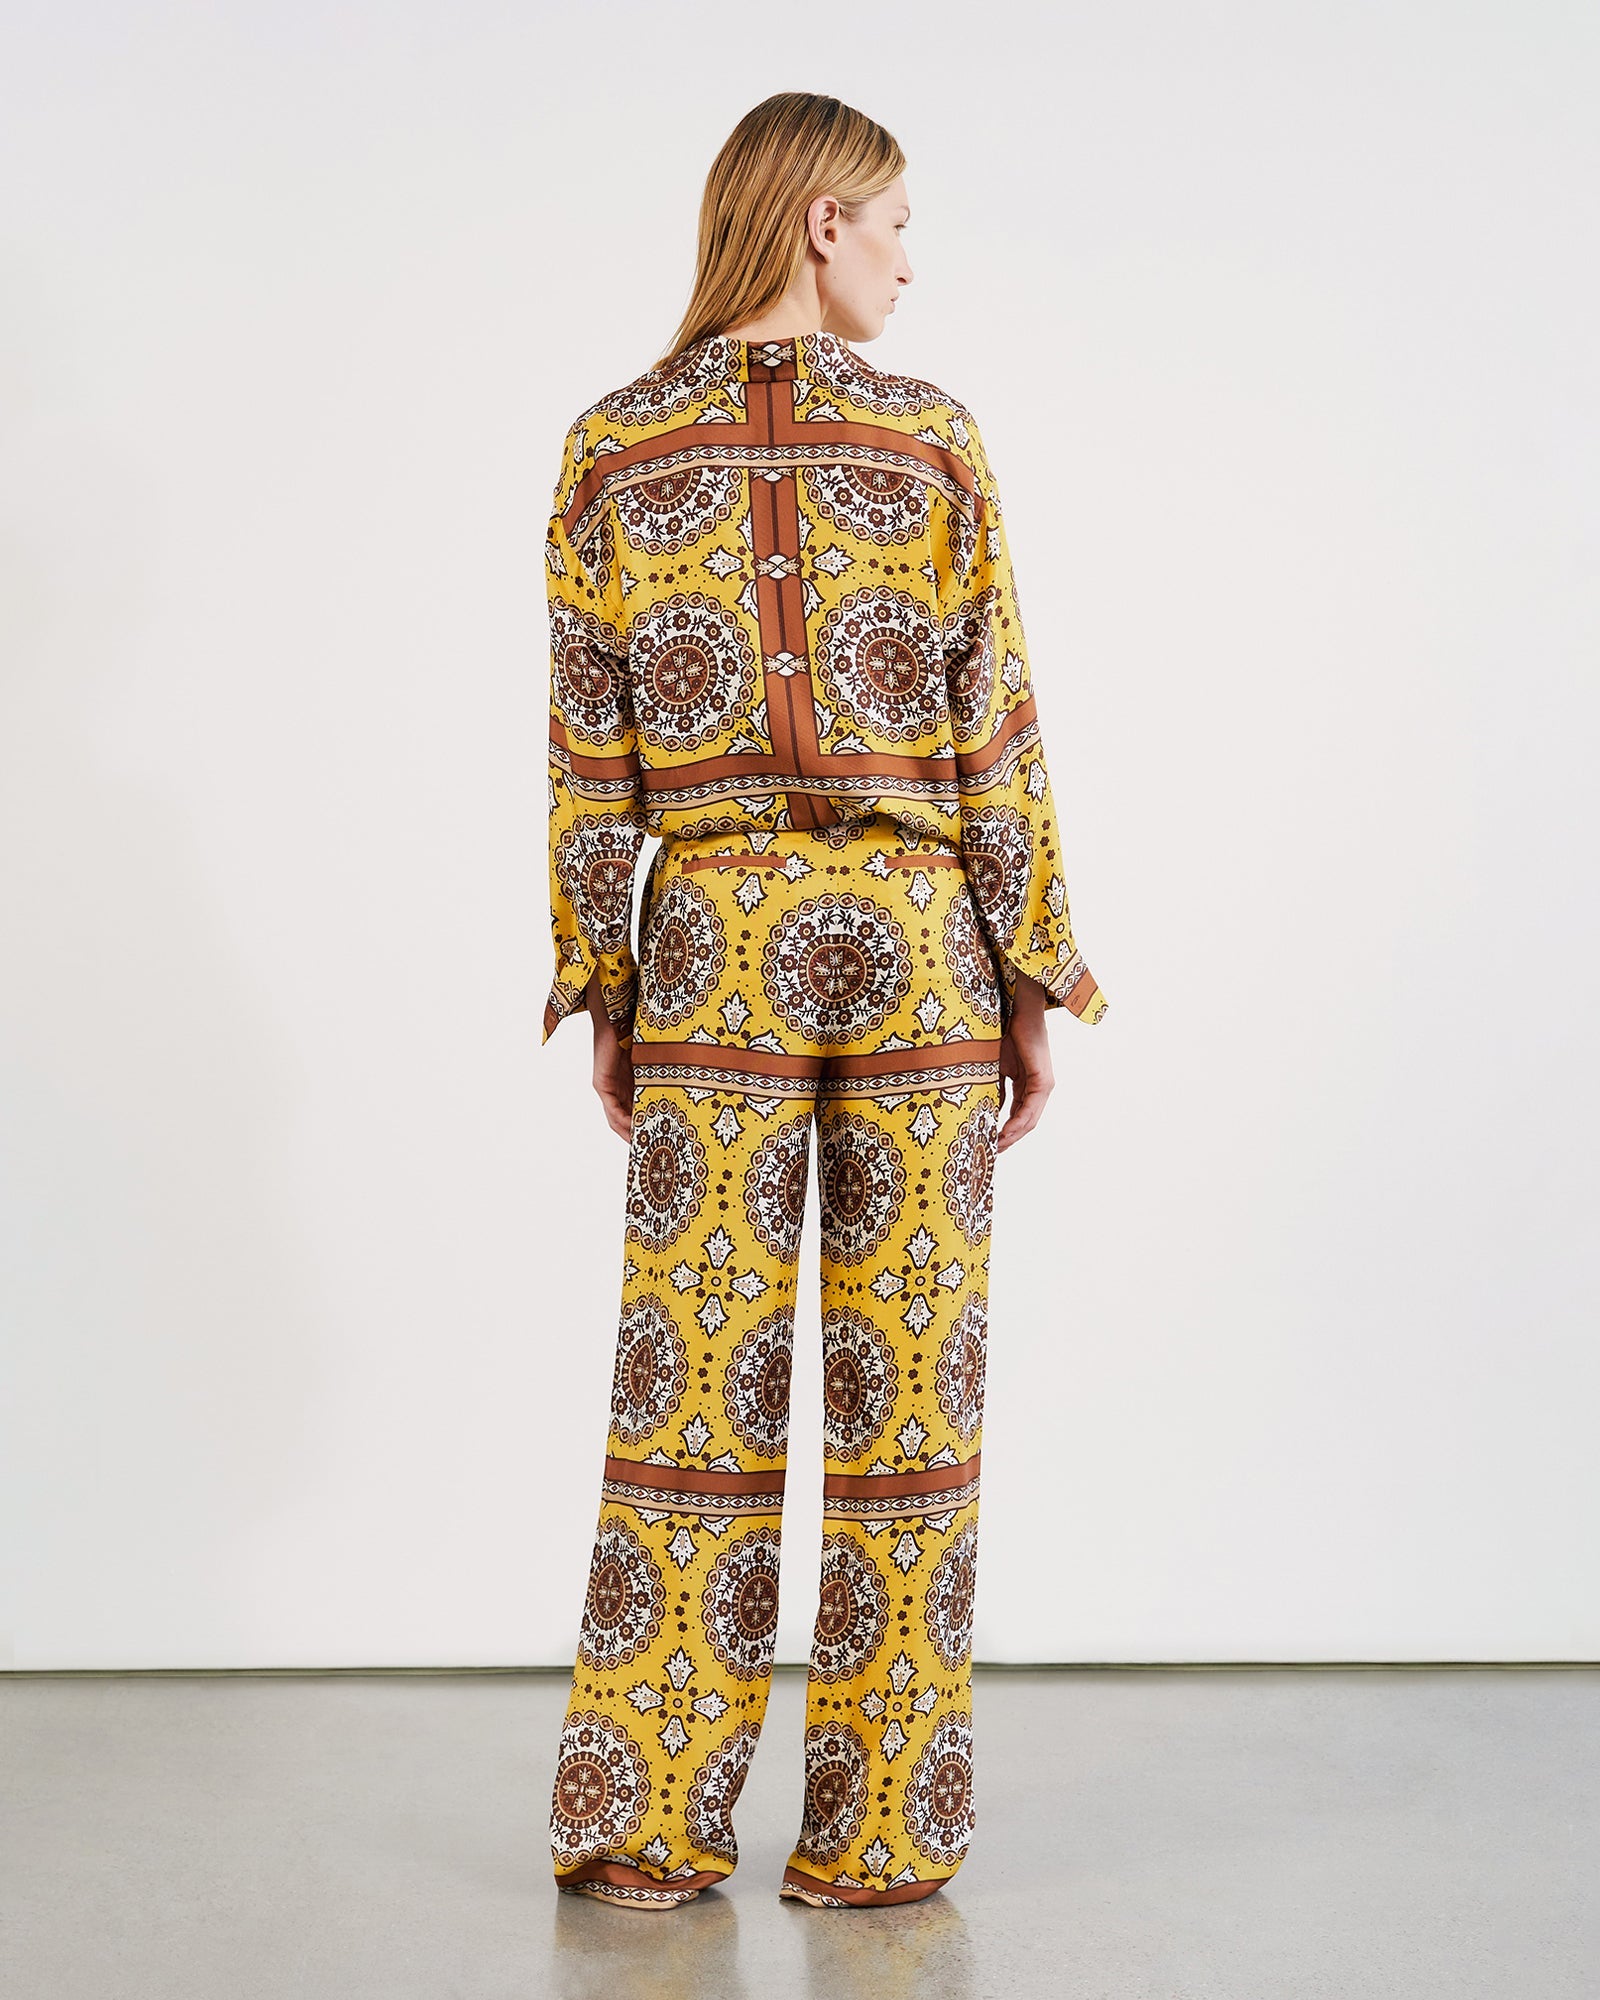 Nili Lotan Germain Silk Pant in Scarf Print Yellow available at TNT The New Trend Australia.